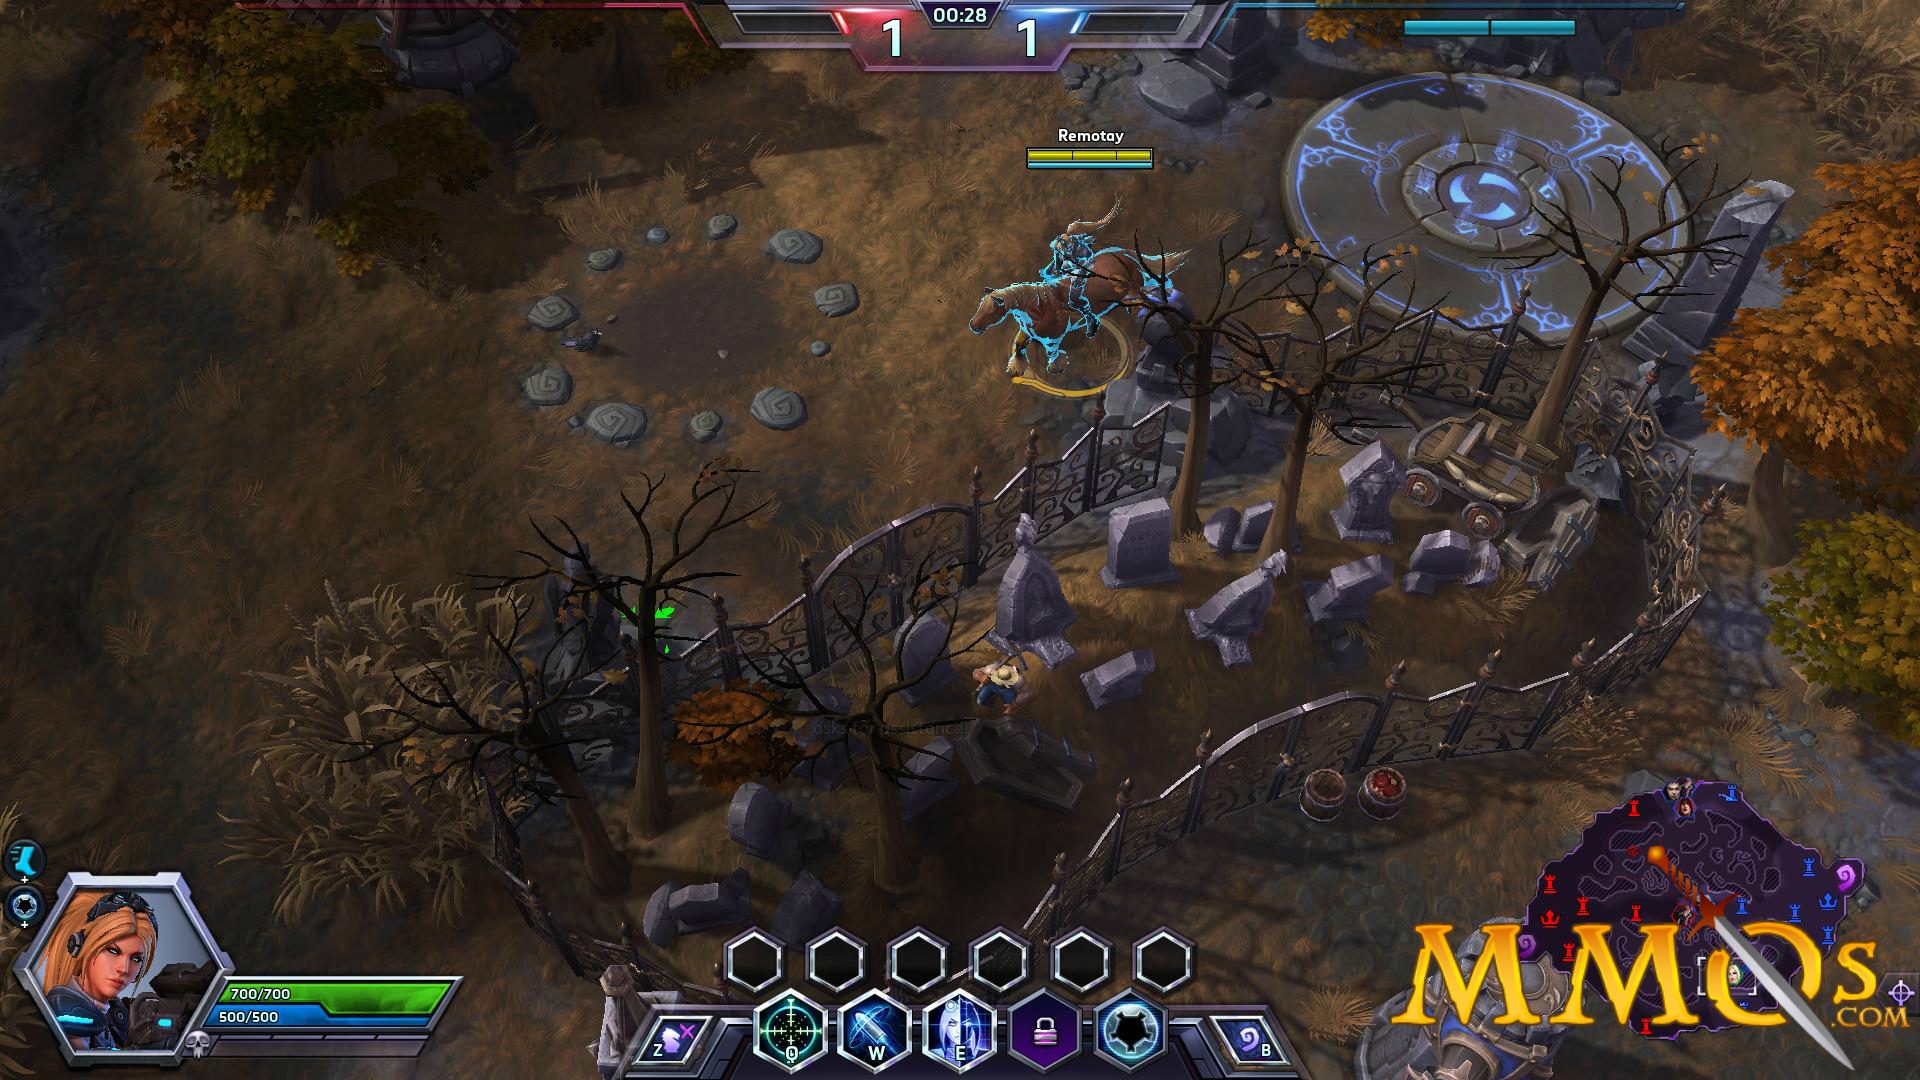 heroes of the storm unable to start correctly